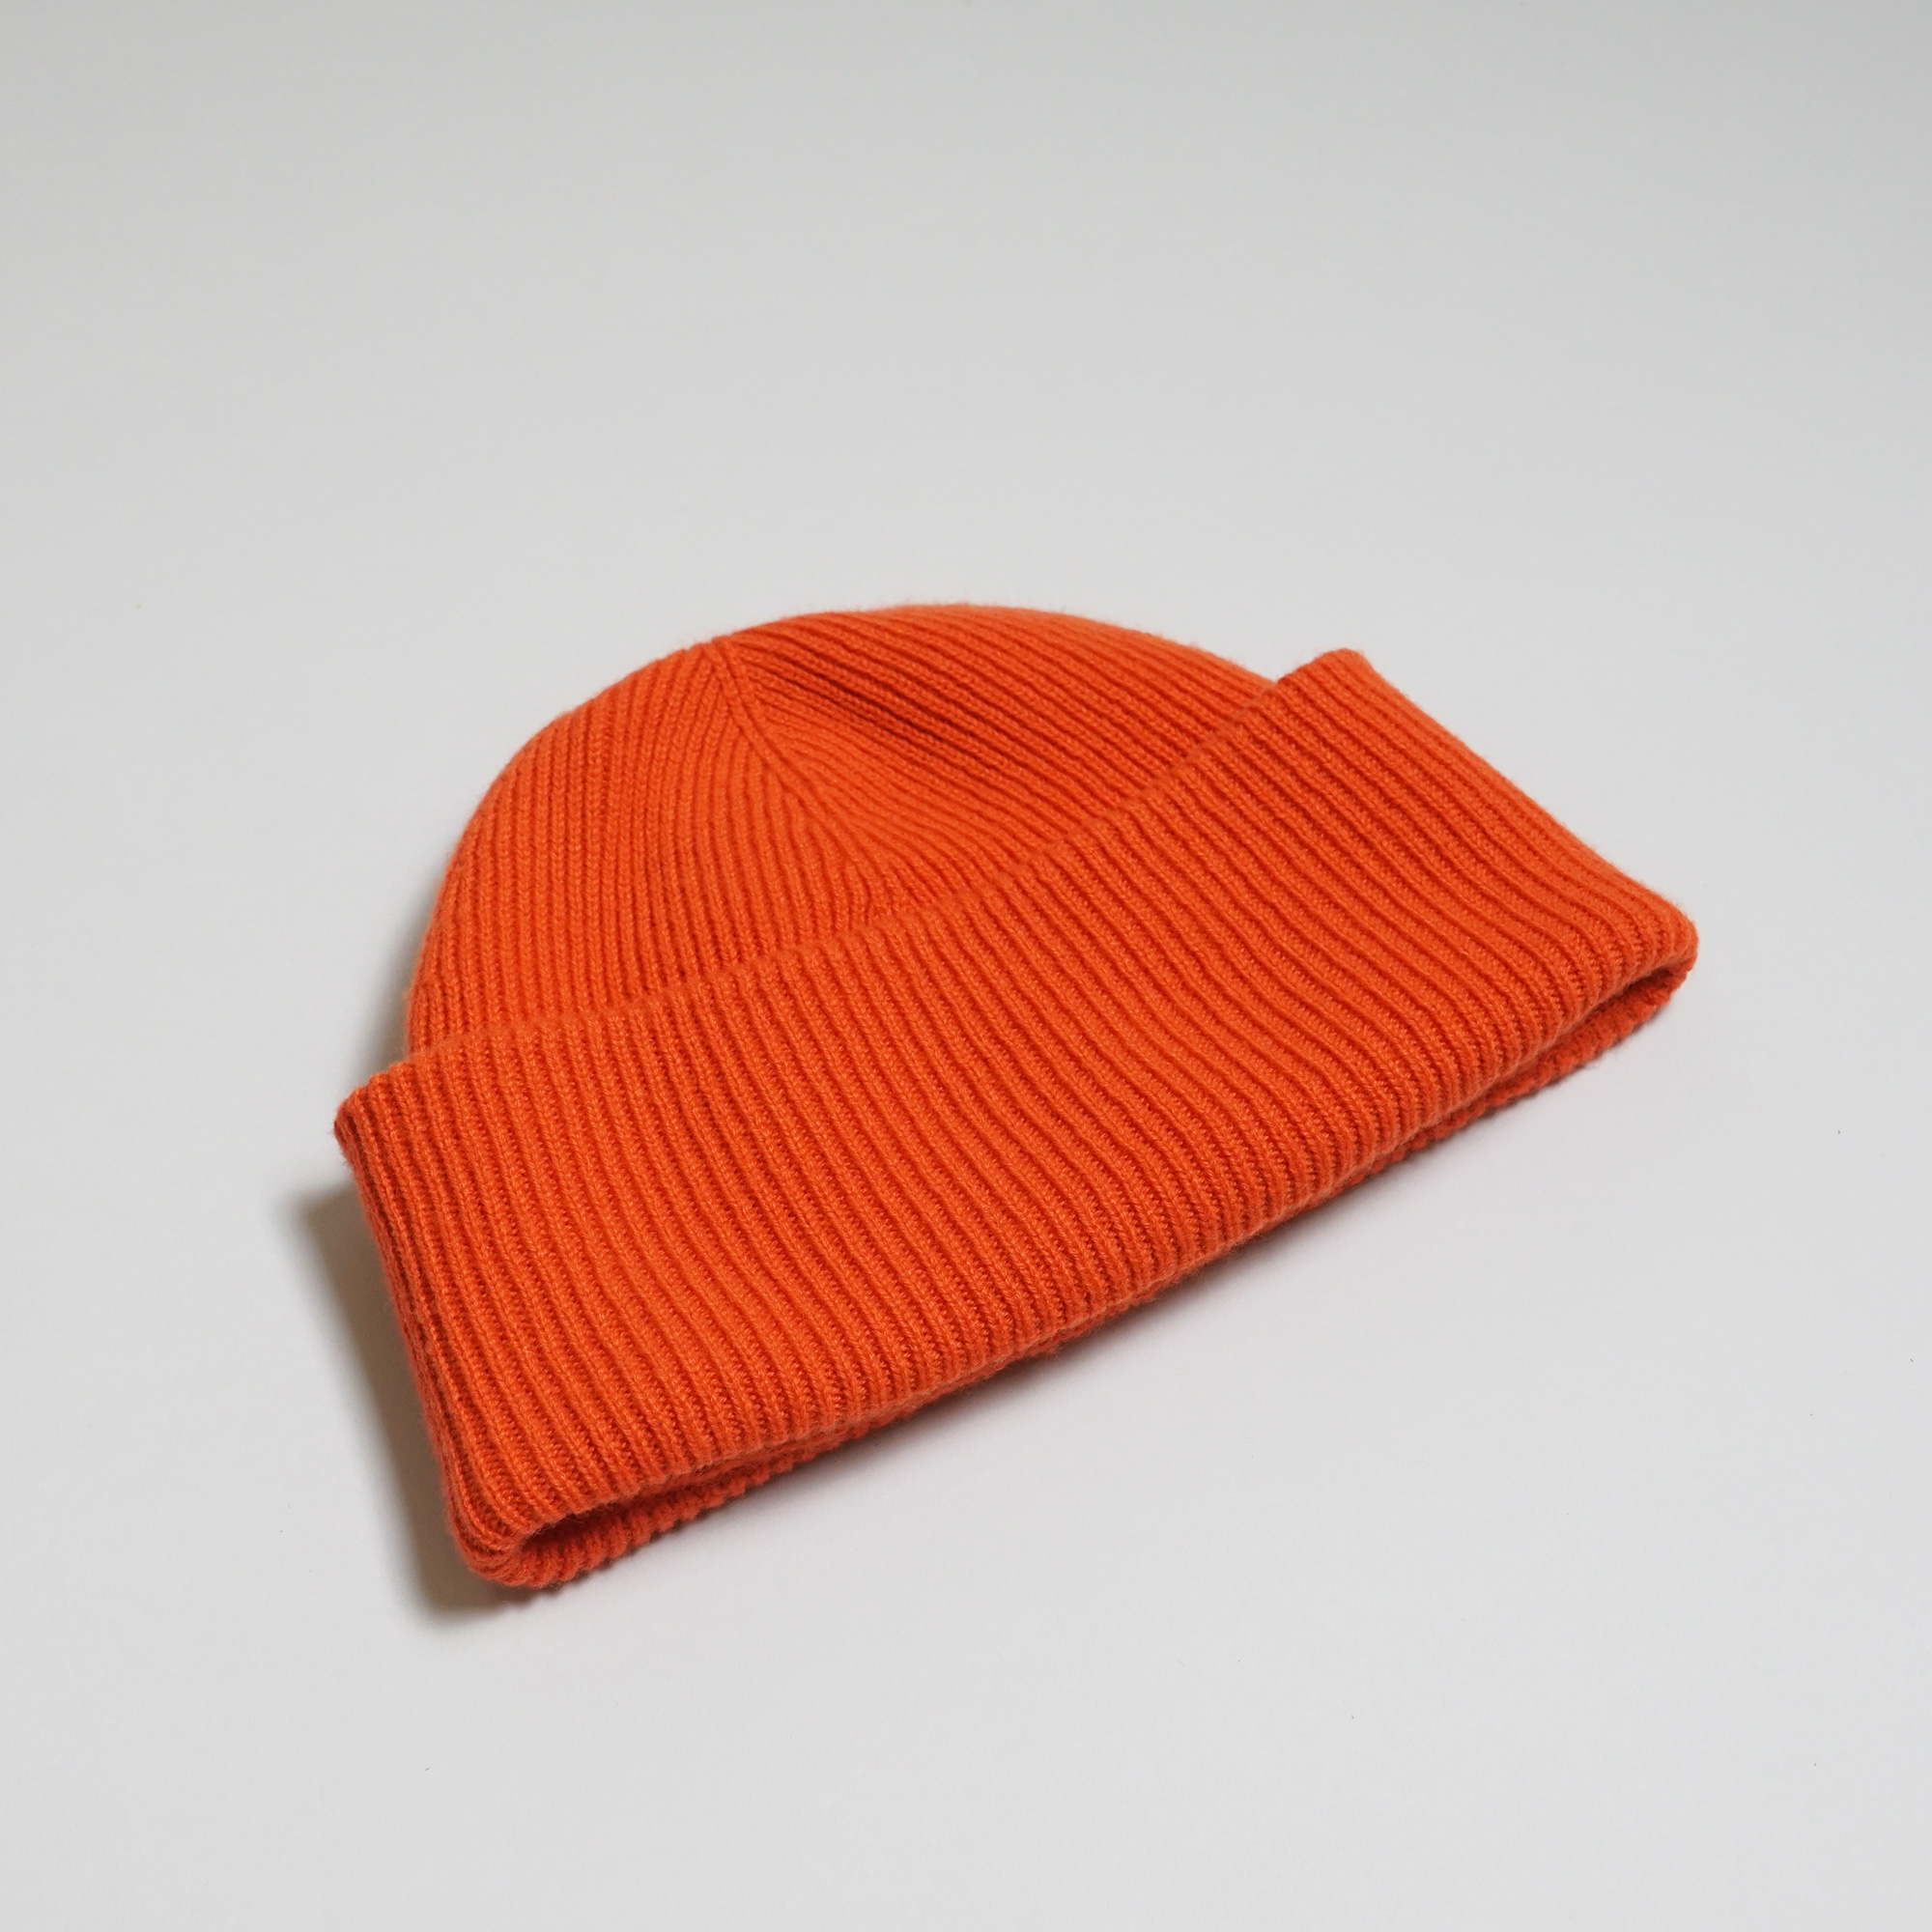 Day Balaclava in Orange color by Arpenteur for C'H'C'M'